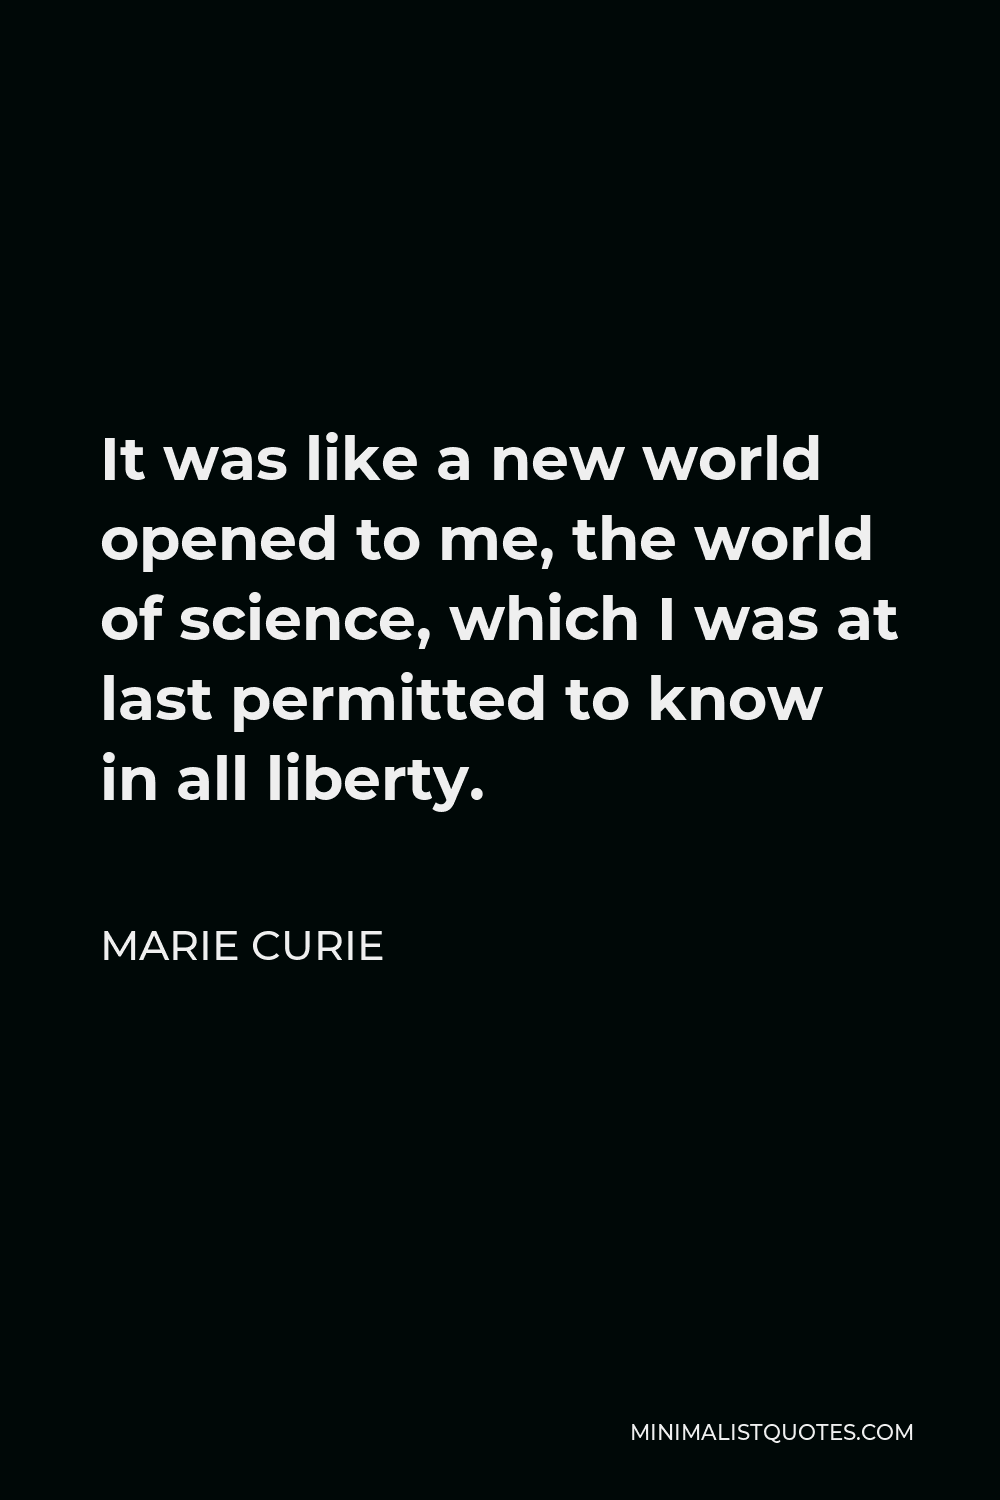 Marie Curie Quote - It was like a new world opened to me, the world of science, which I was at last permitted to know in all liberty.